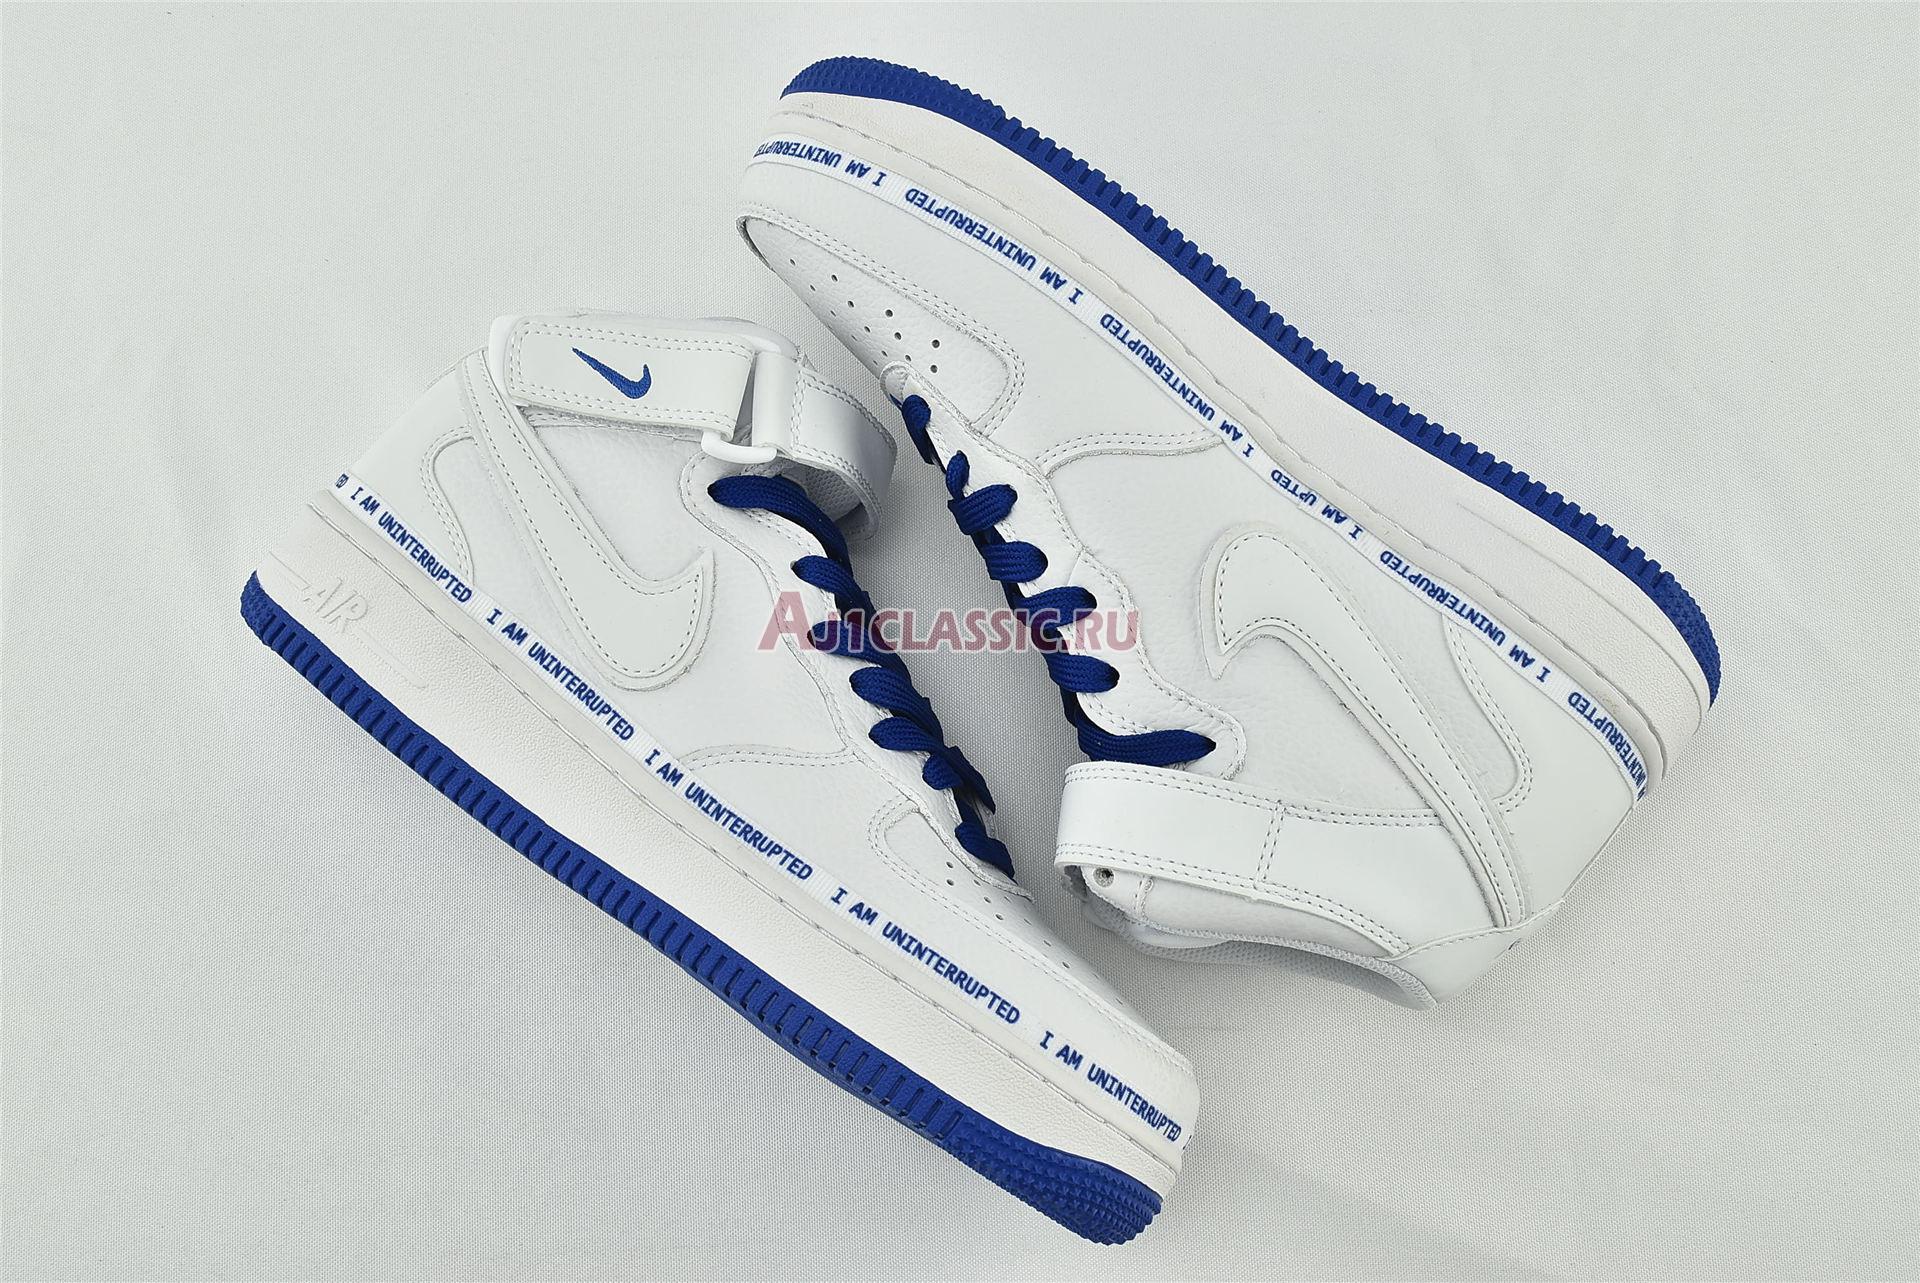 Uninterrupted x Nike Air Force 1 Mid "More Than" CT1206-600